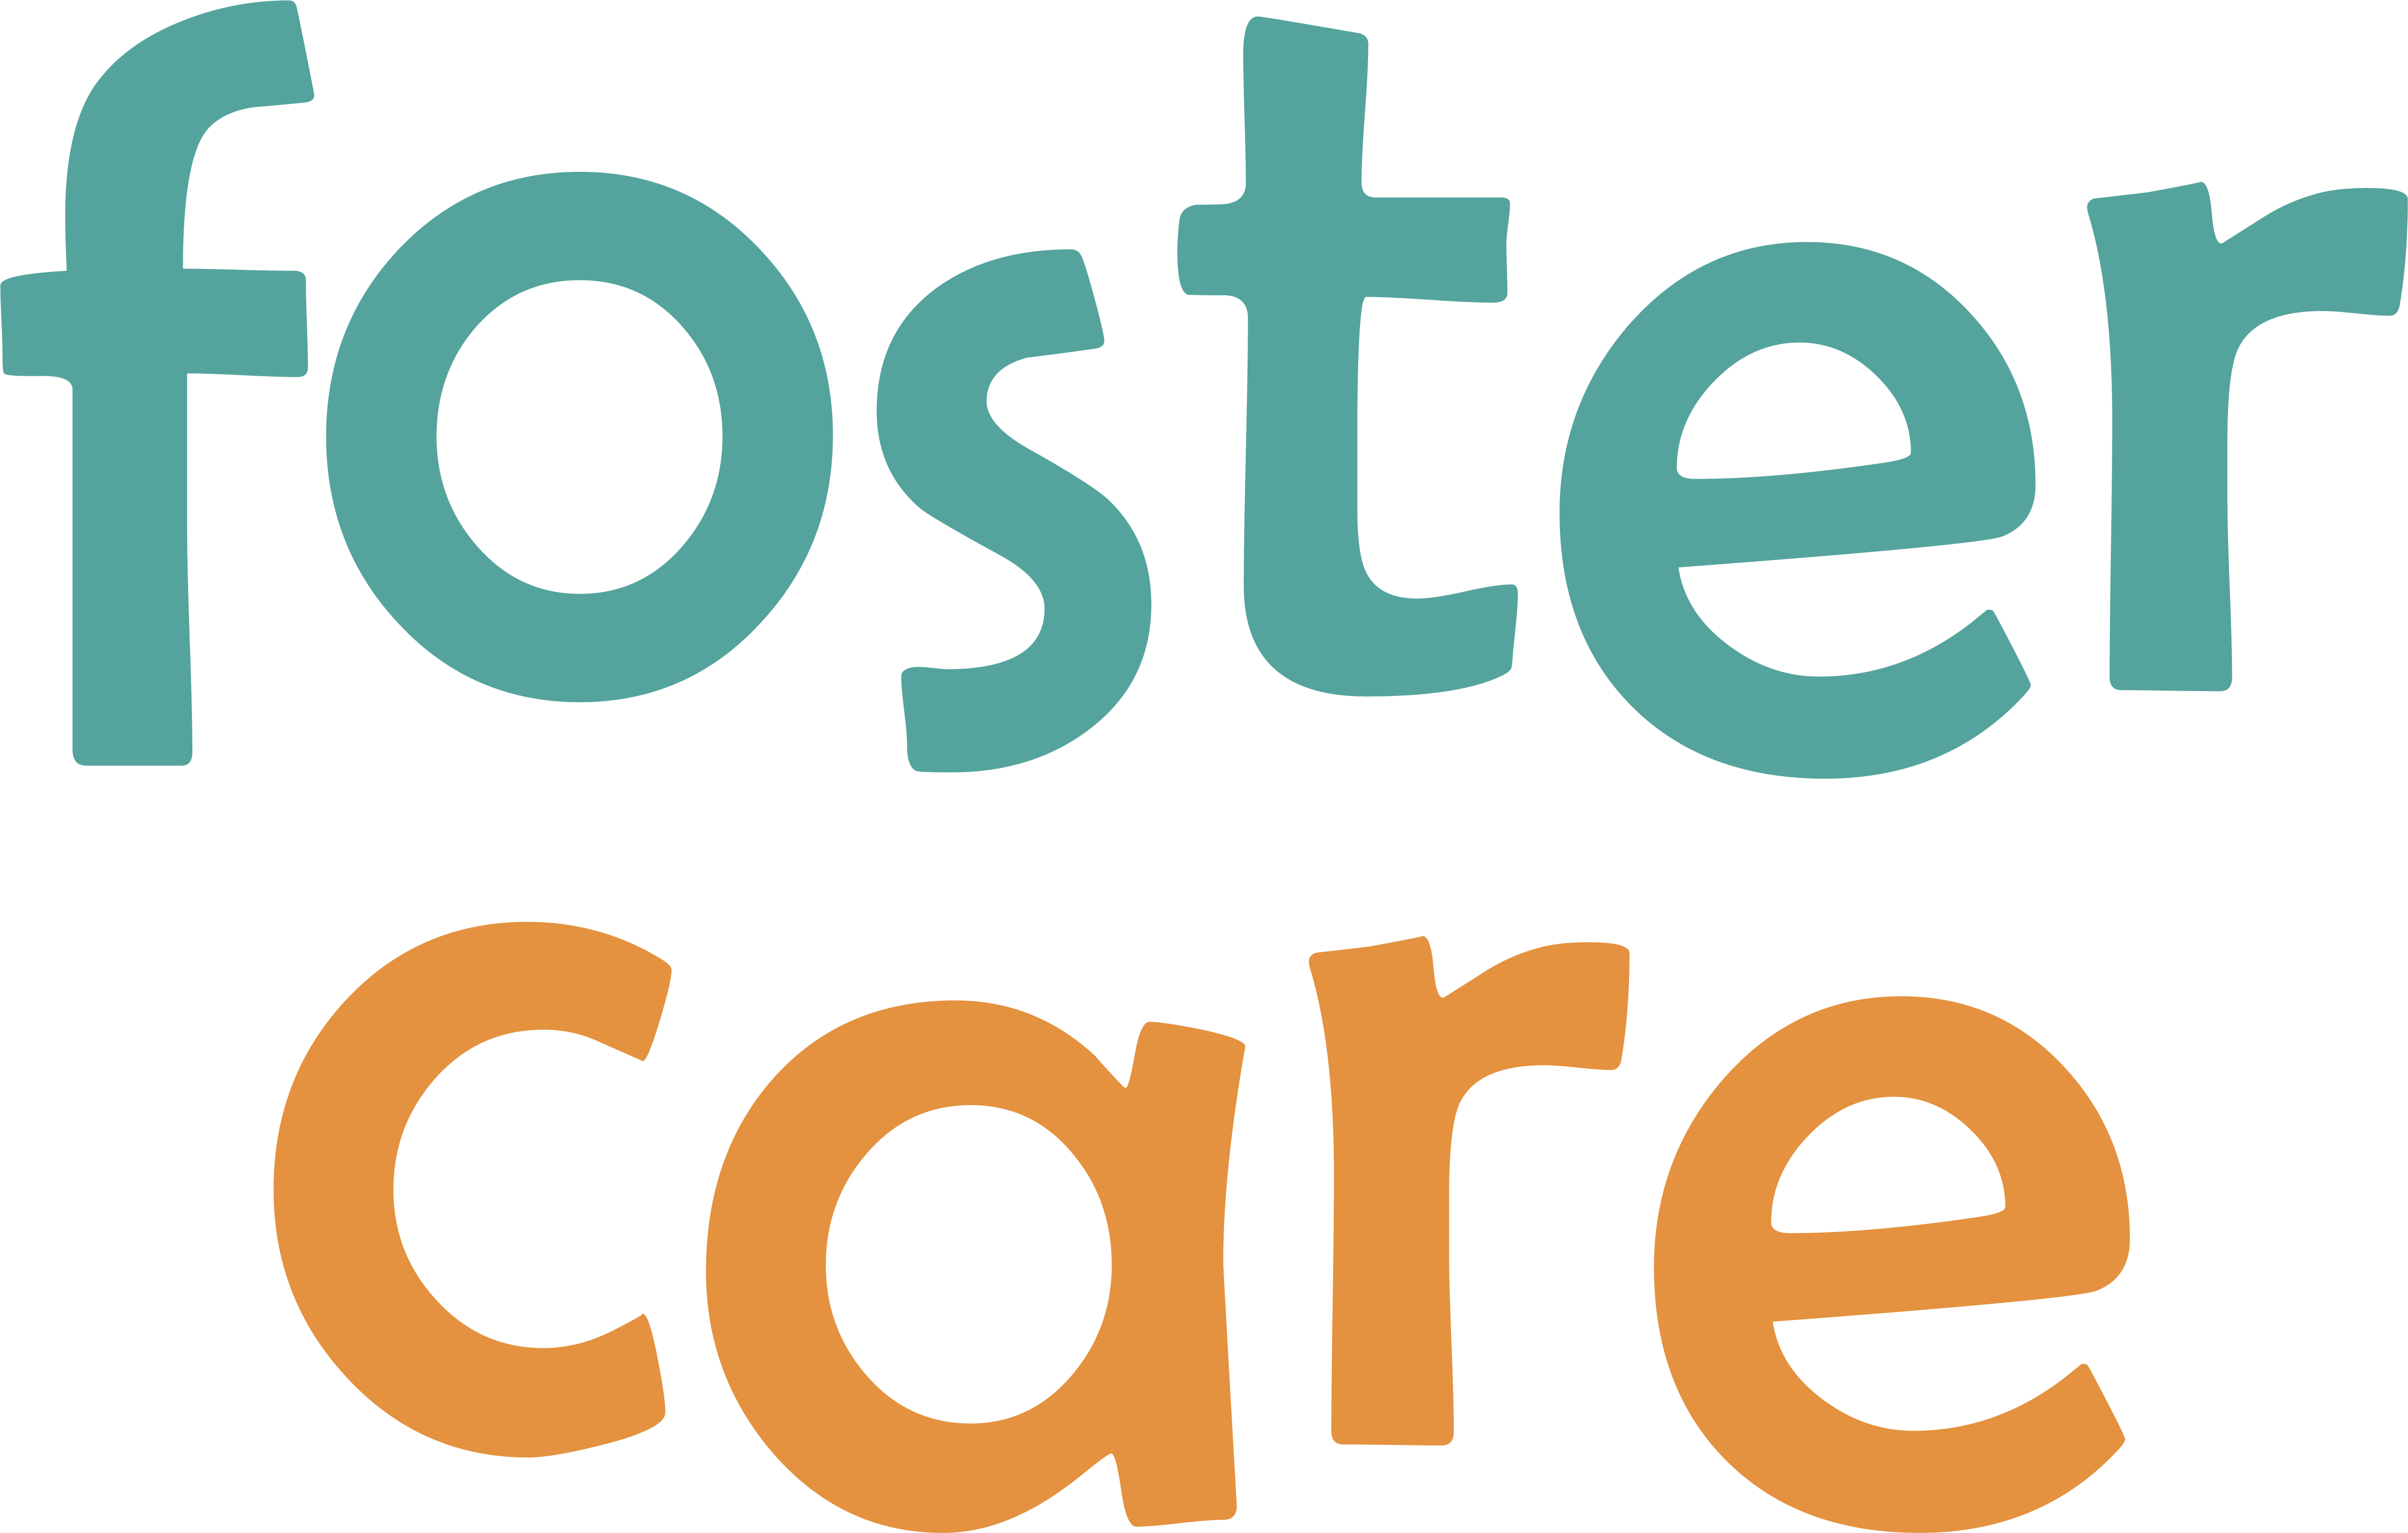 Foster Care Wordmark_cropped